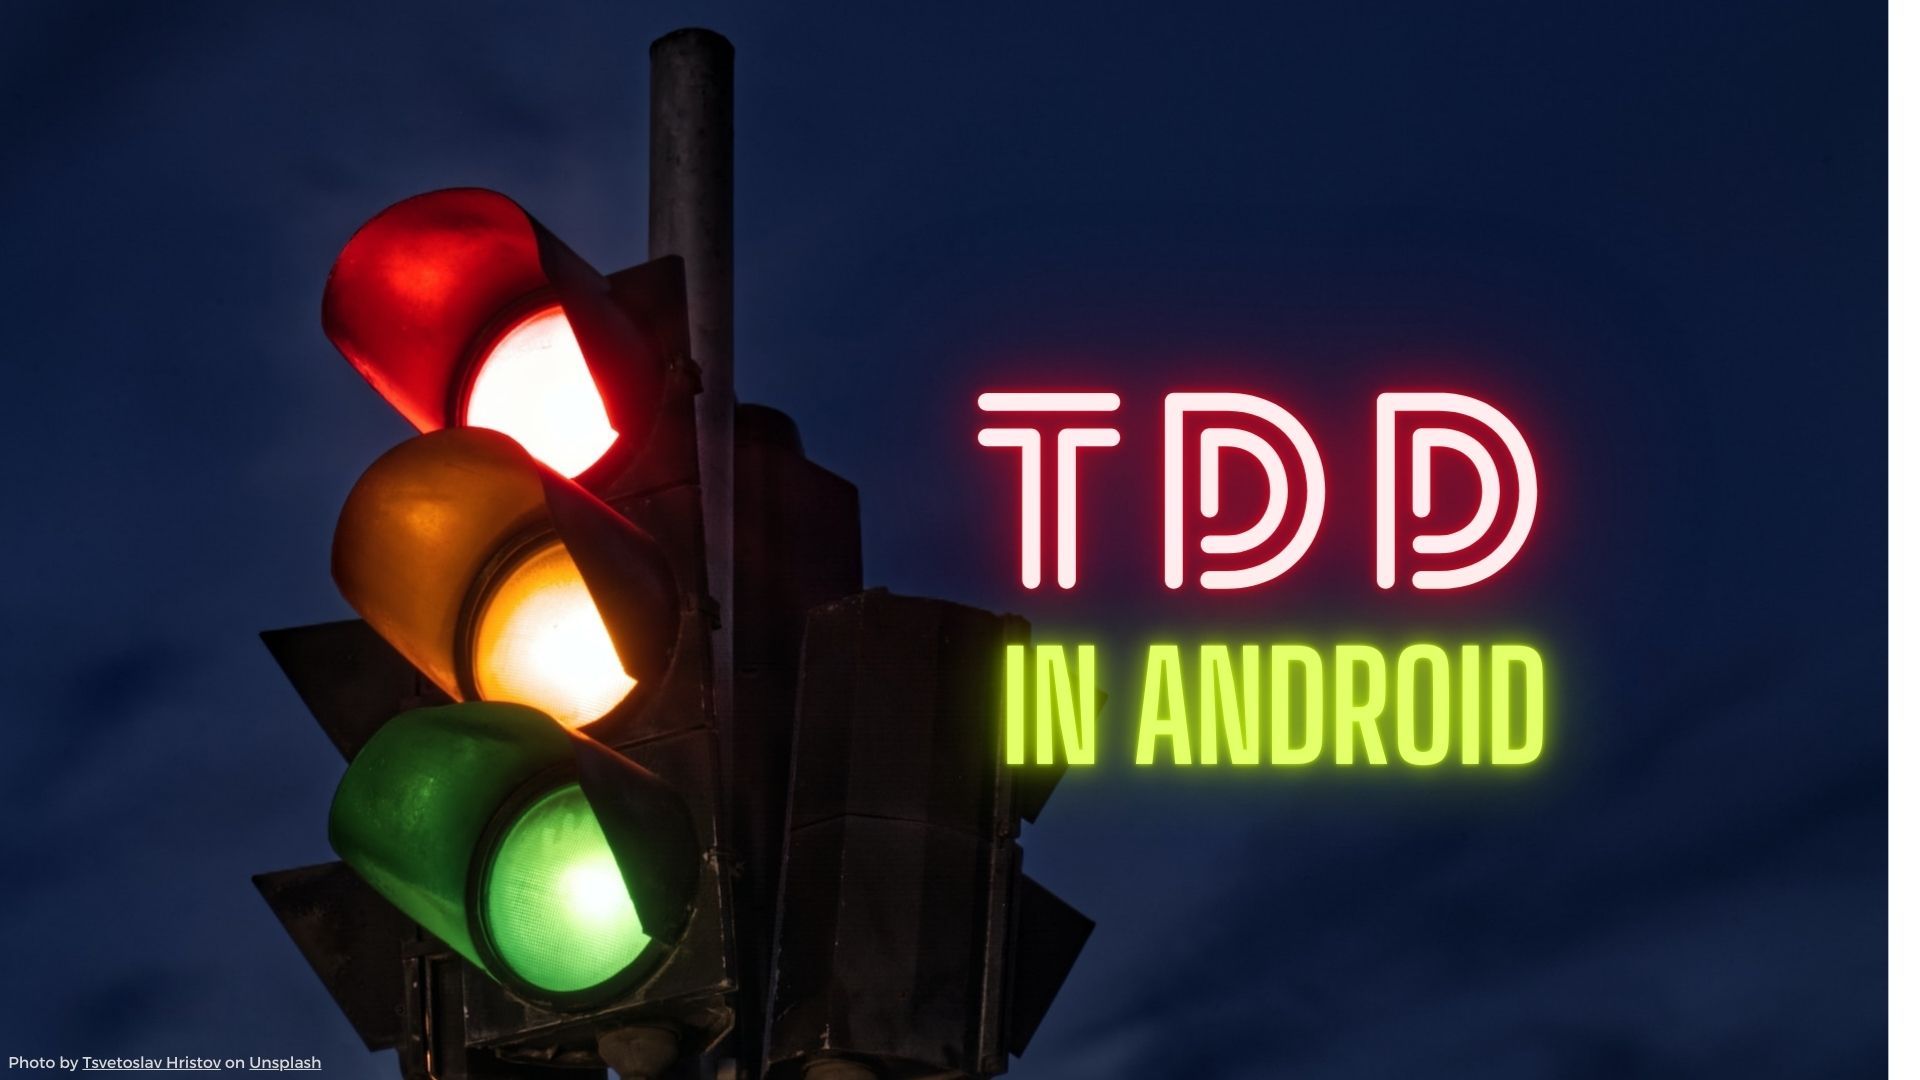 Image for Test Driven Development in Android Apps – A Practical Guide to TDD